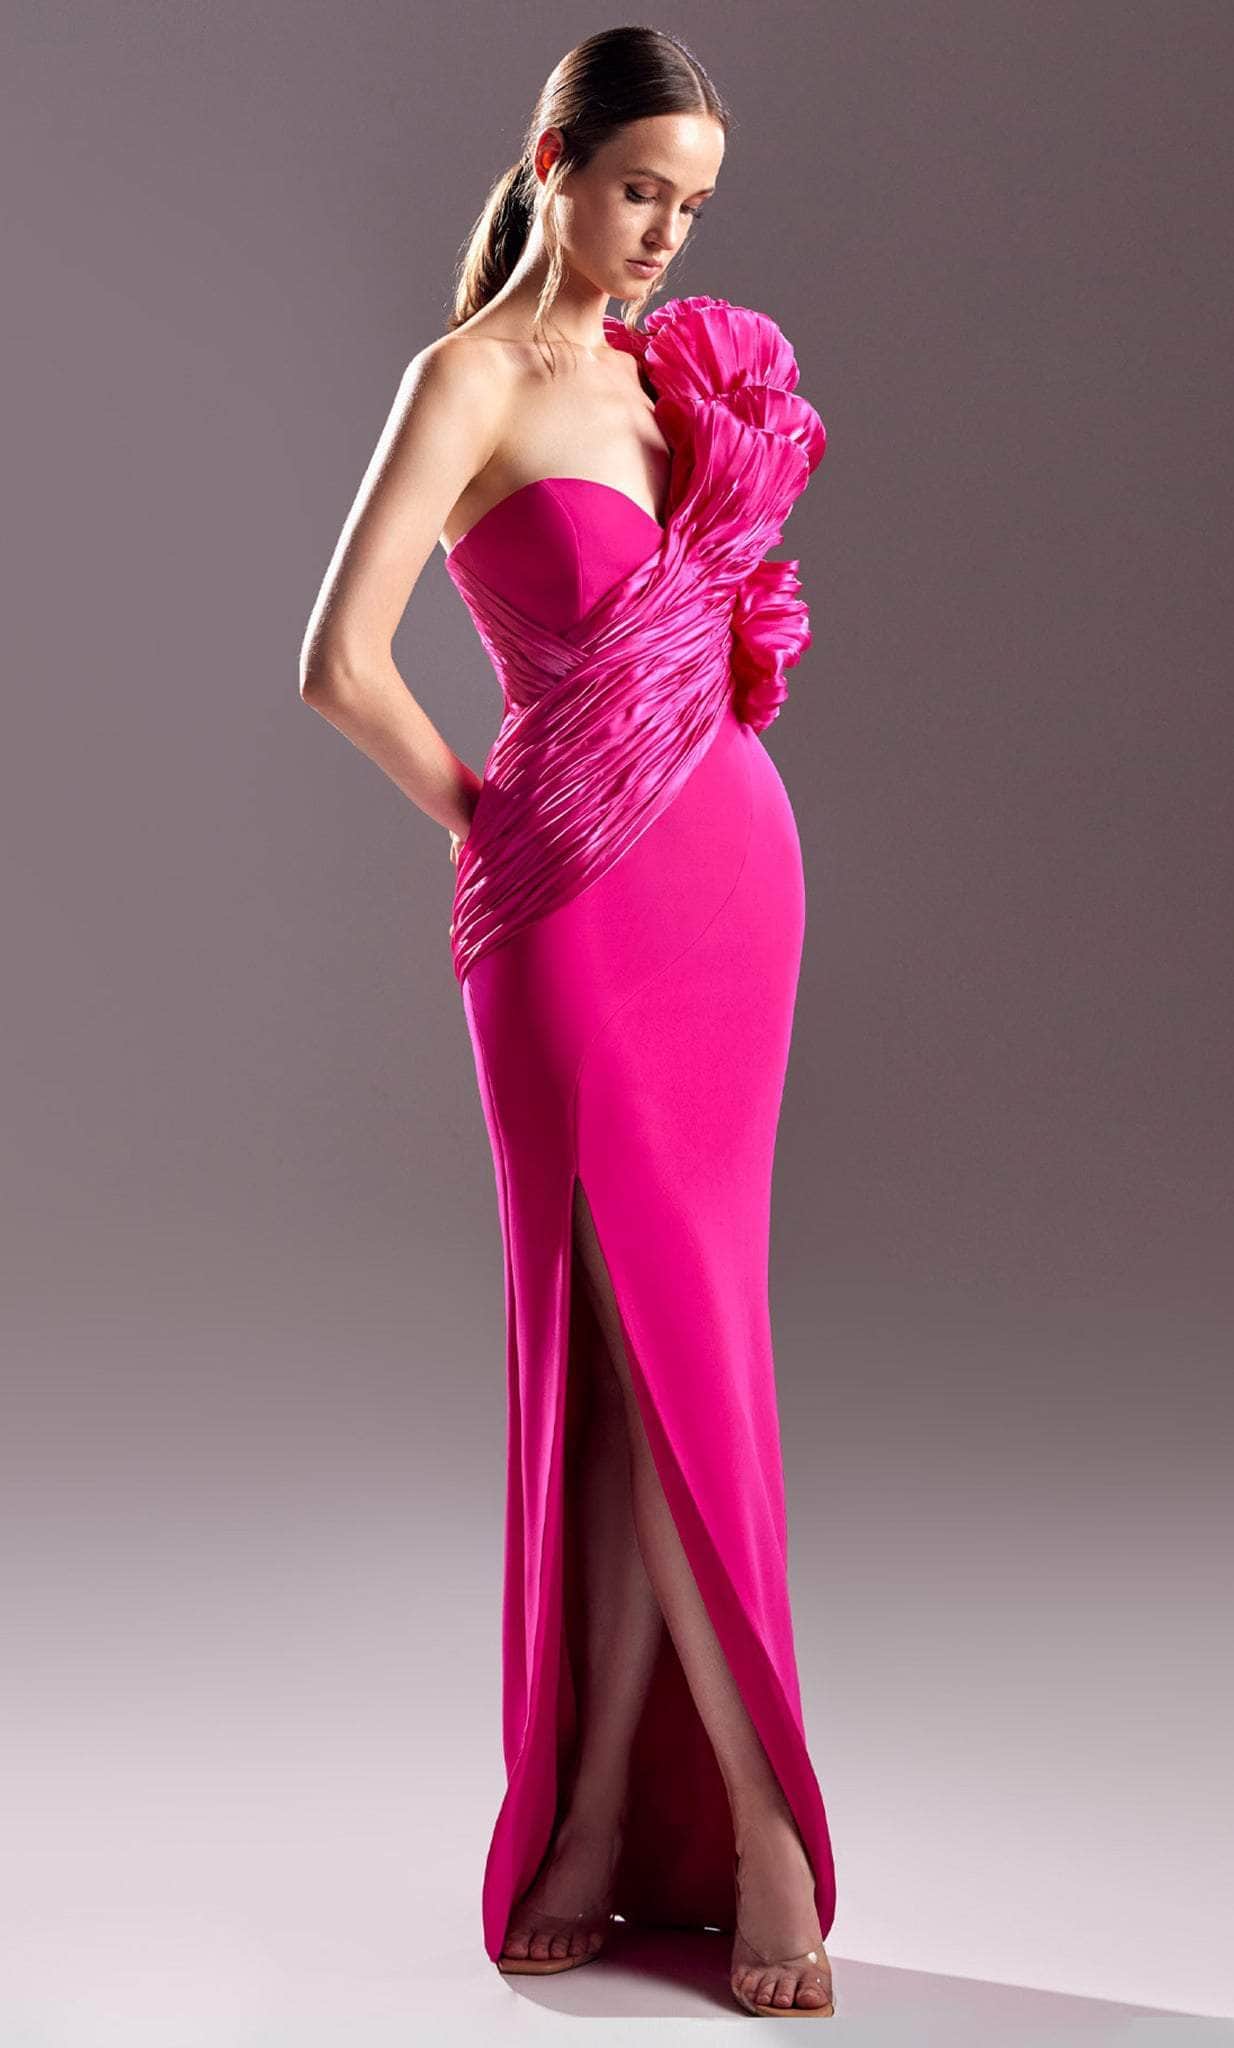 MNM COUTURE G1530 - Ruched One-Shoulder Sleeve Prom Dress Prom Dress 0 / Fuchsia